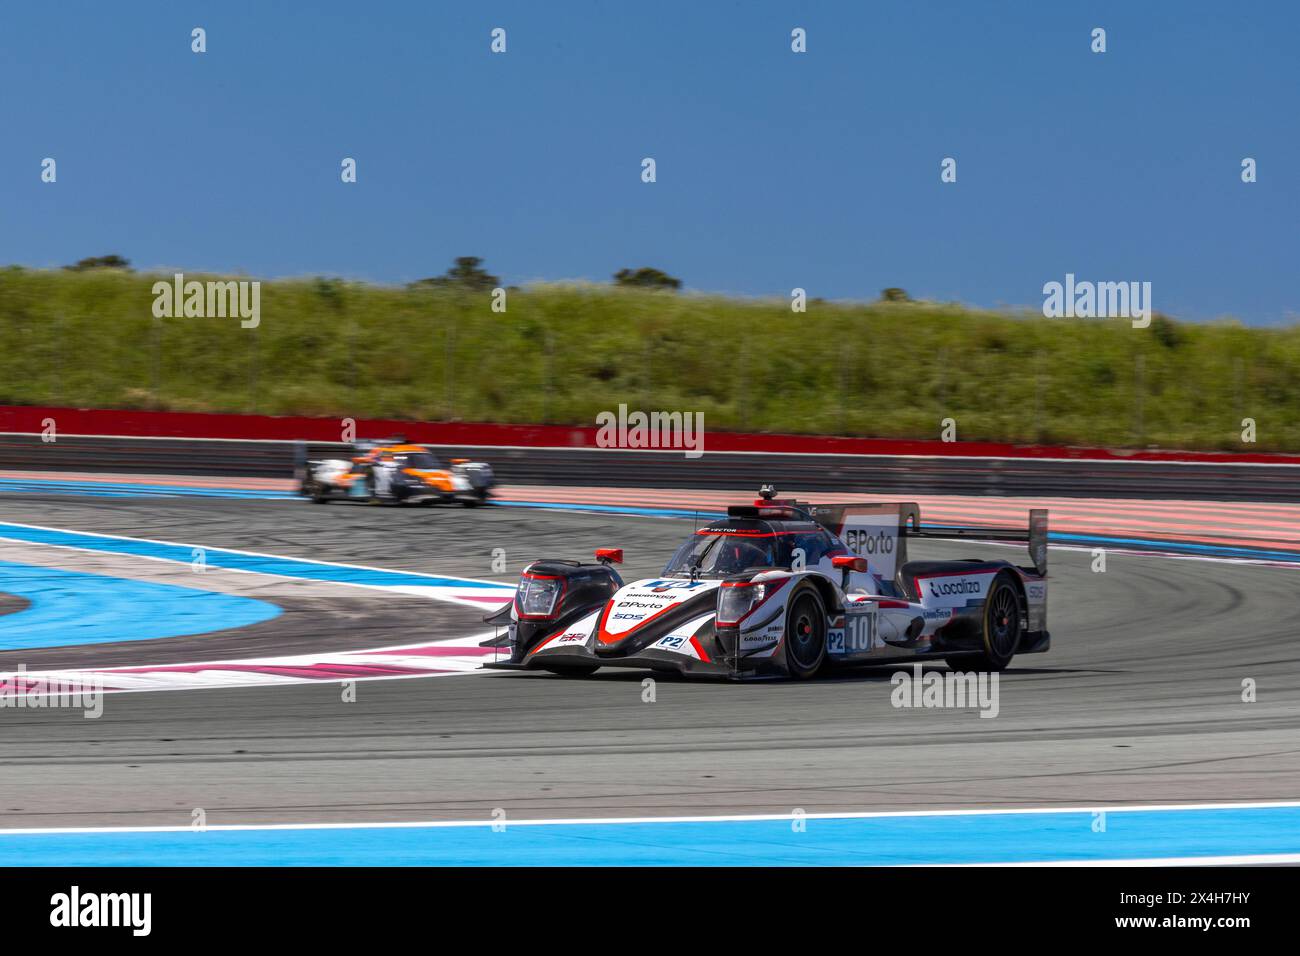 Le Castellet, France, 3 May 2024, #10 Vector Sport (Gbr) Oreca 07/Gibson (LMP2) - Ryan Cullen (Gbr) Stéphane Richelmi (Mco) Felipe Drugovich (Bra) during the 4 Hours of Le Castellet, second race of the 2024 European Le Mans Series (ELMS) at Circuit Paul Ricard from May 02 to 05, 2024 in Le Castellet, France - Photo Laurent Cartalade/MPS Agency Credit MPS Agency/Alamy Live News Stock Photo